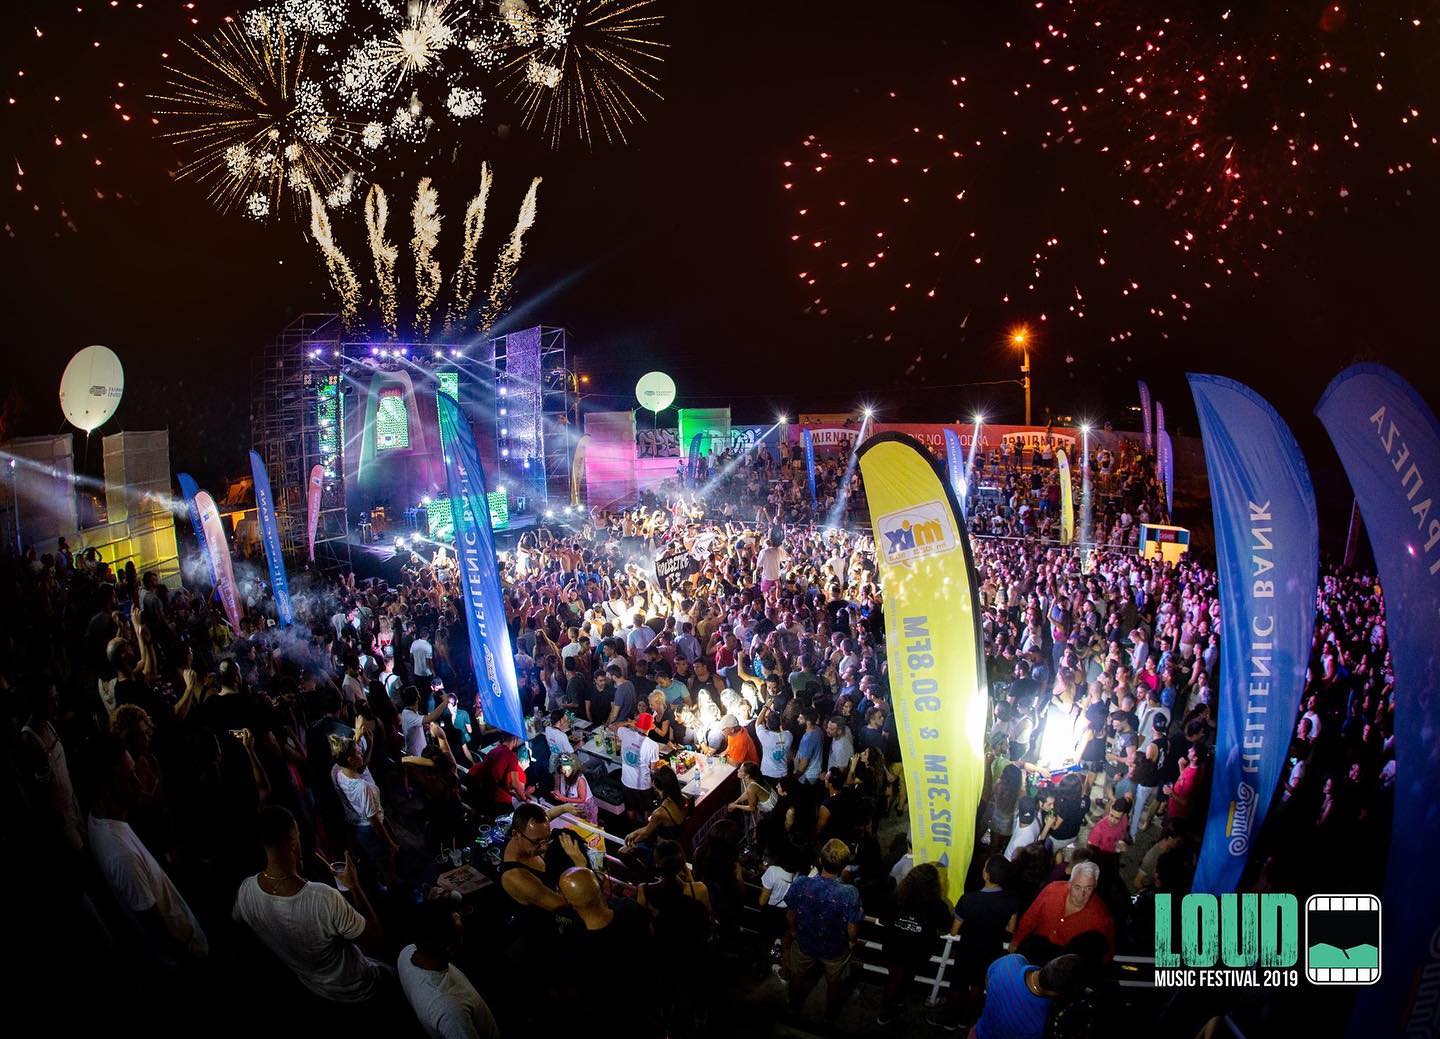 Over 50 DJs expected at Loud Music Festival